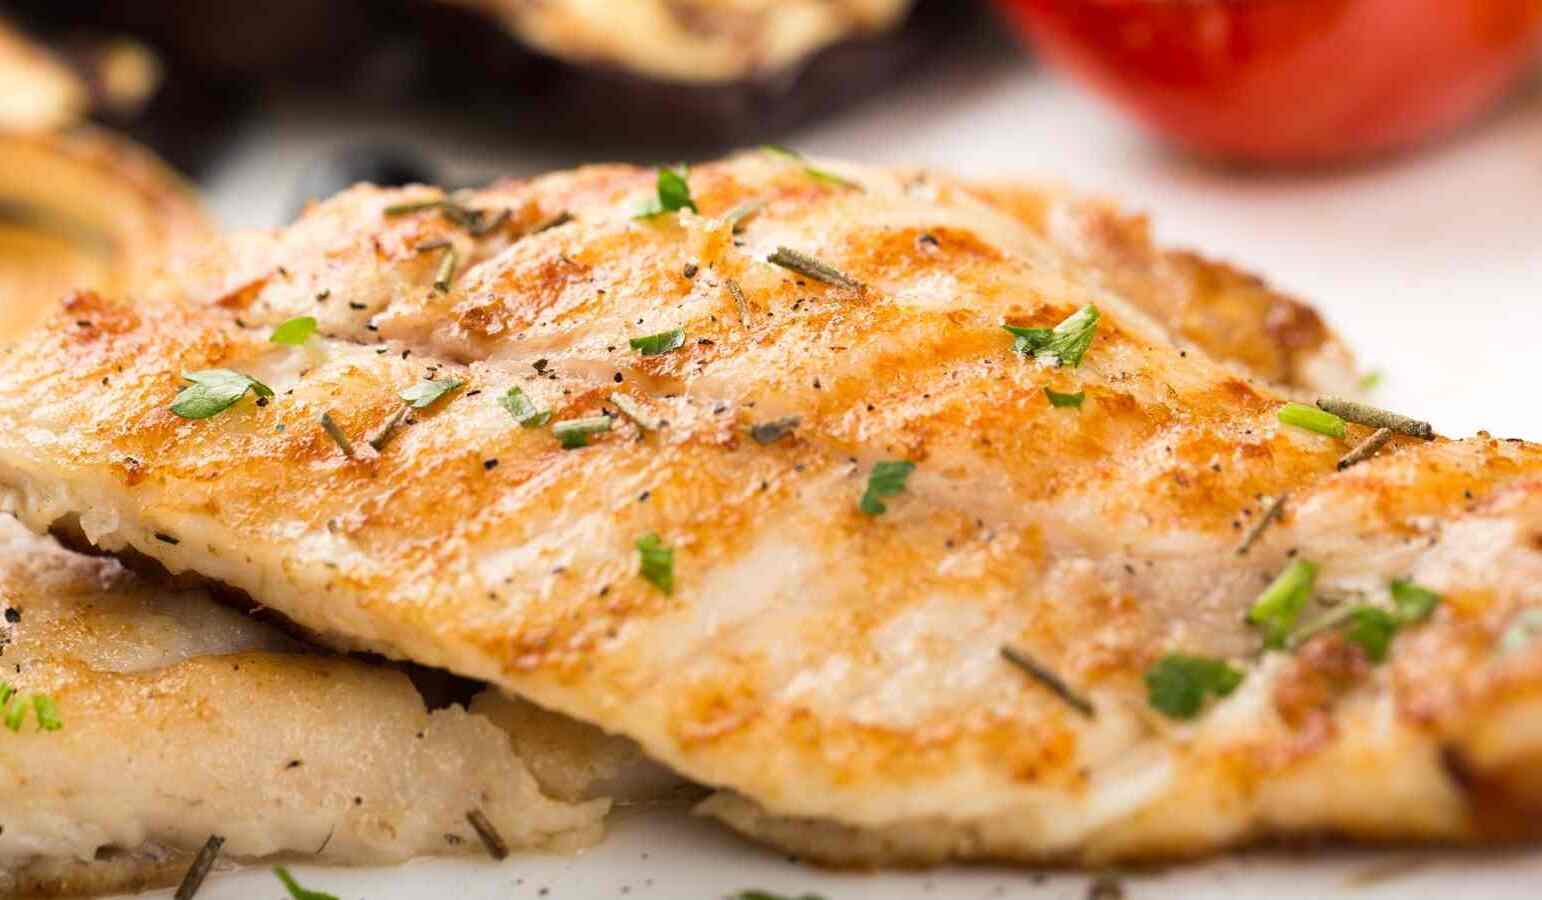 How To Pan Fry Orange Roughy - Recipes.net